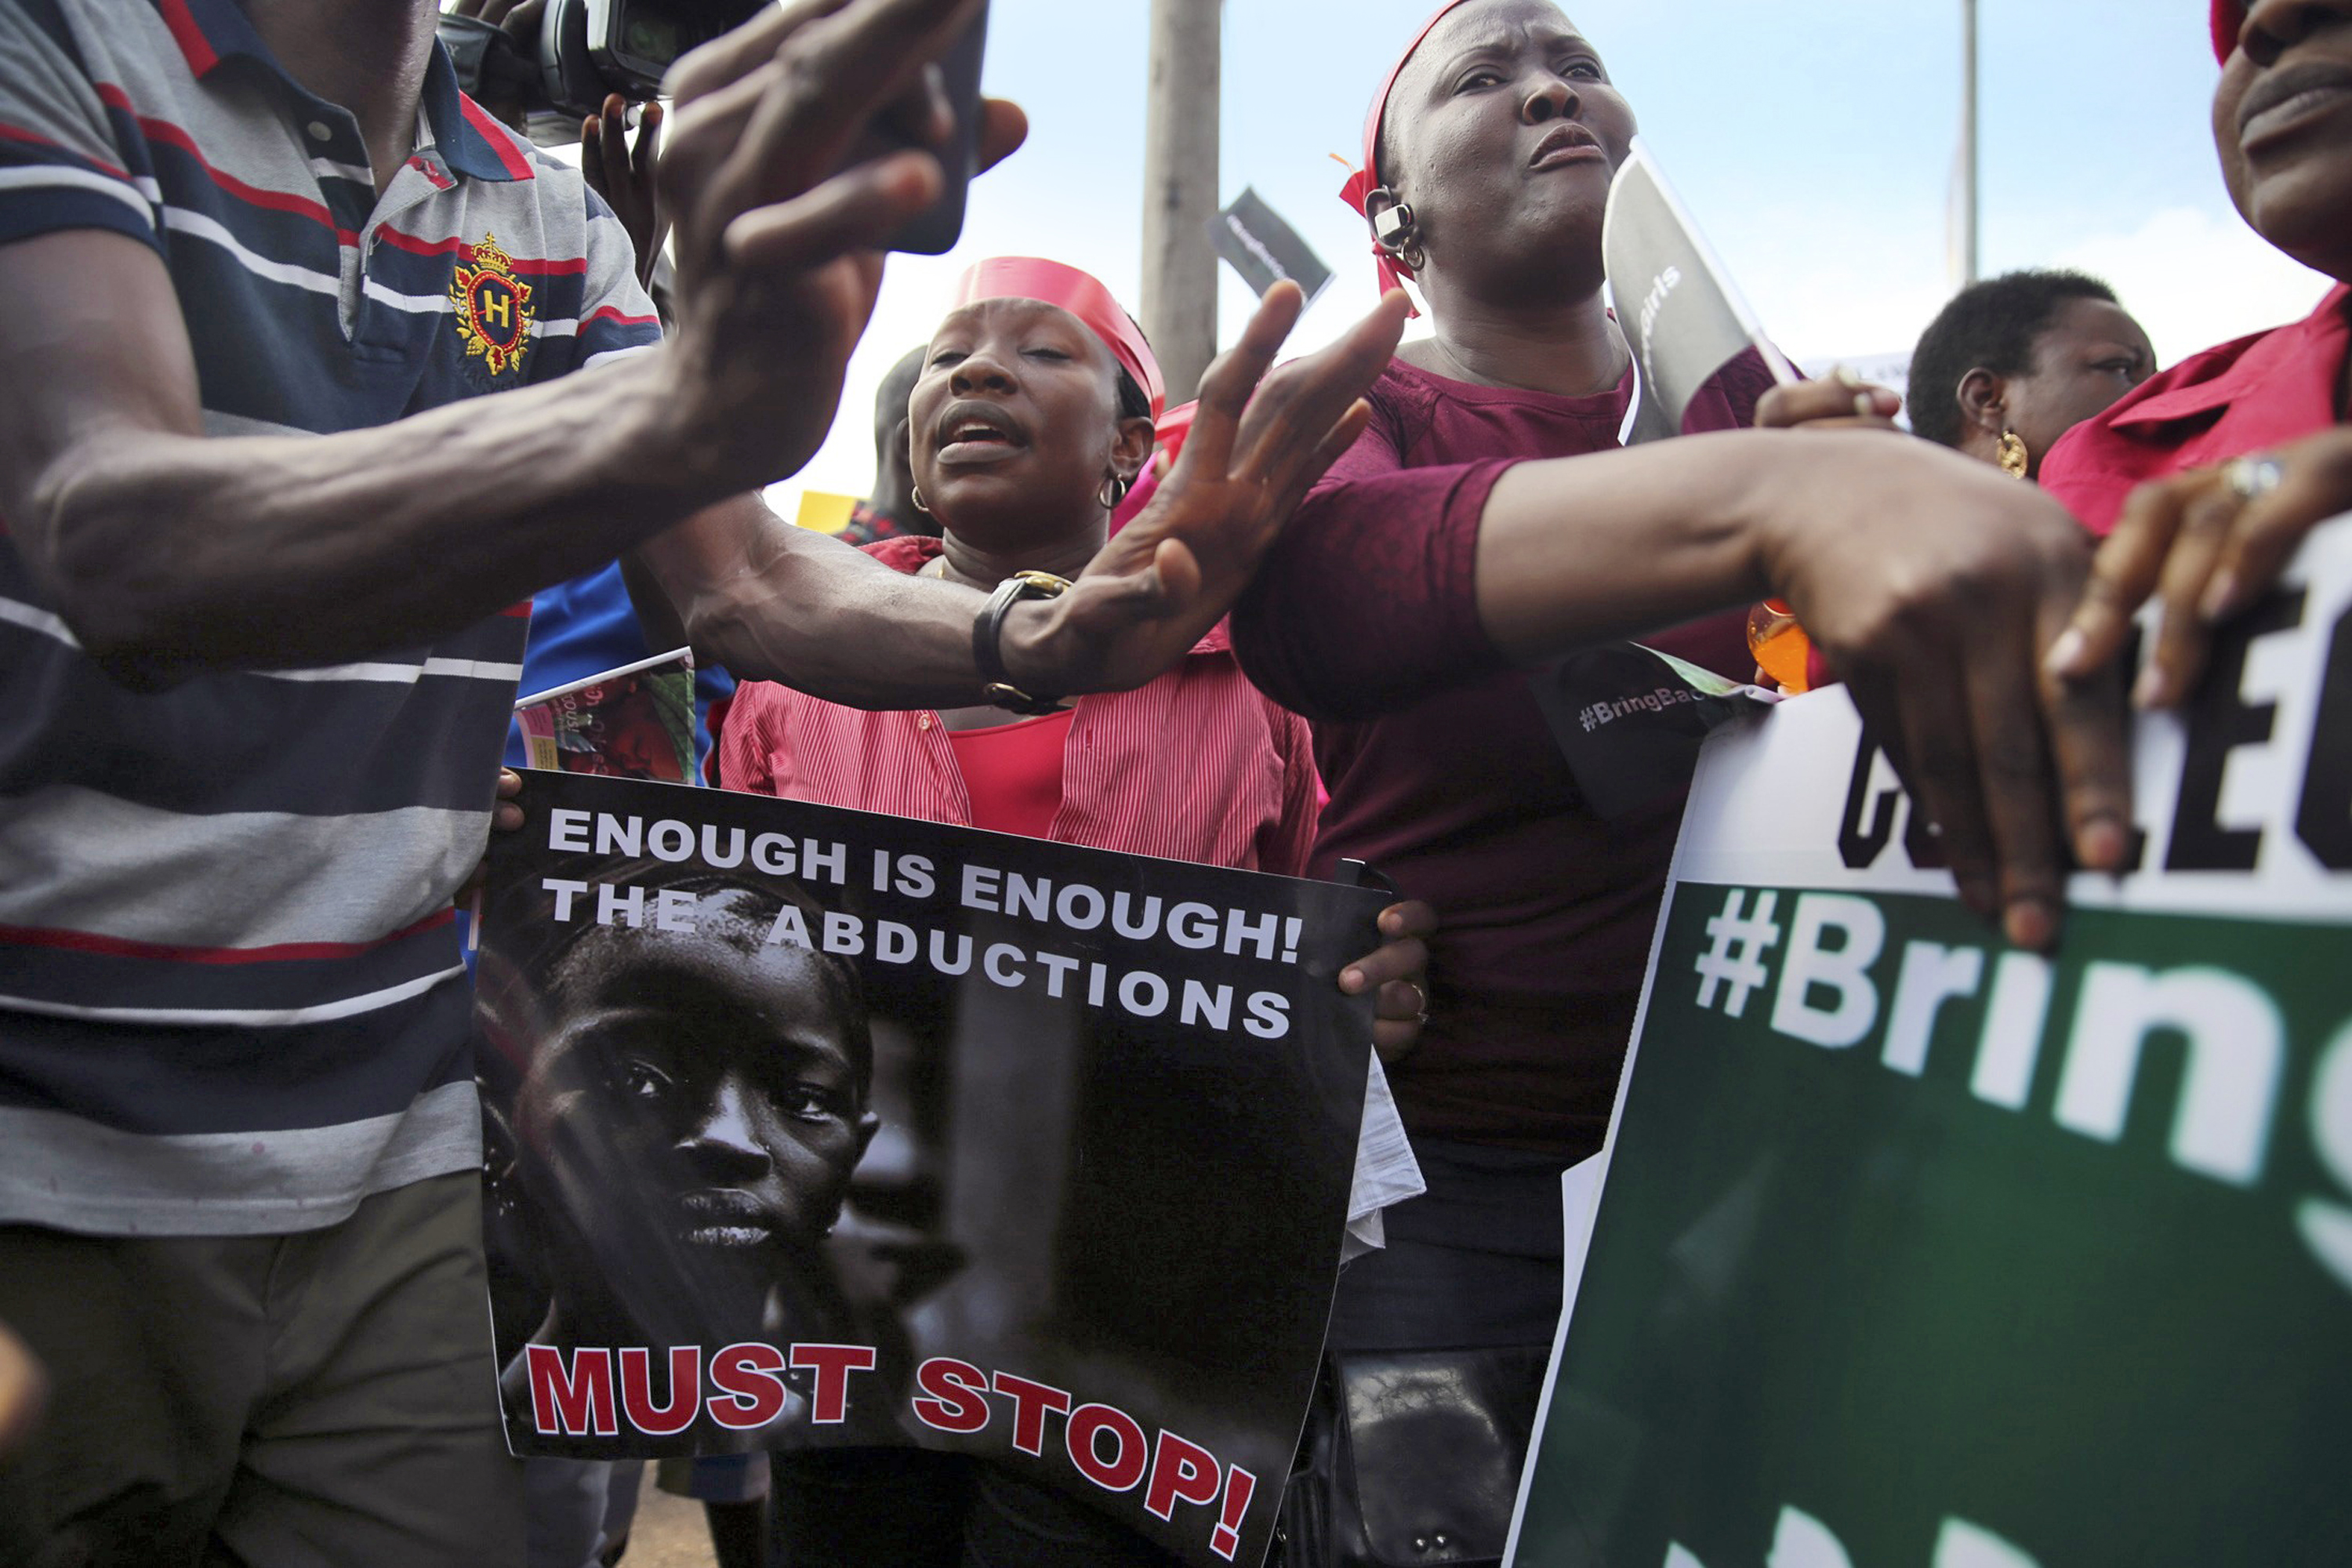 Expressing outrage Citizens in Nigeria’s biggest city, Lagos, protest the abduction of the girls and demand action to find and rescue them (Akintunde Akinleye—REUTERS)